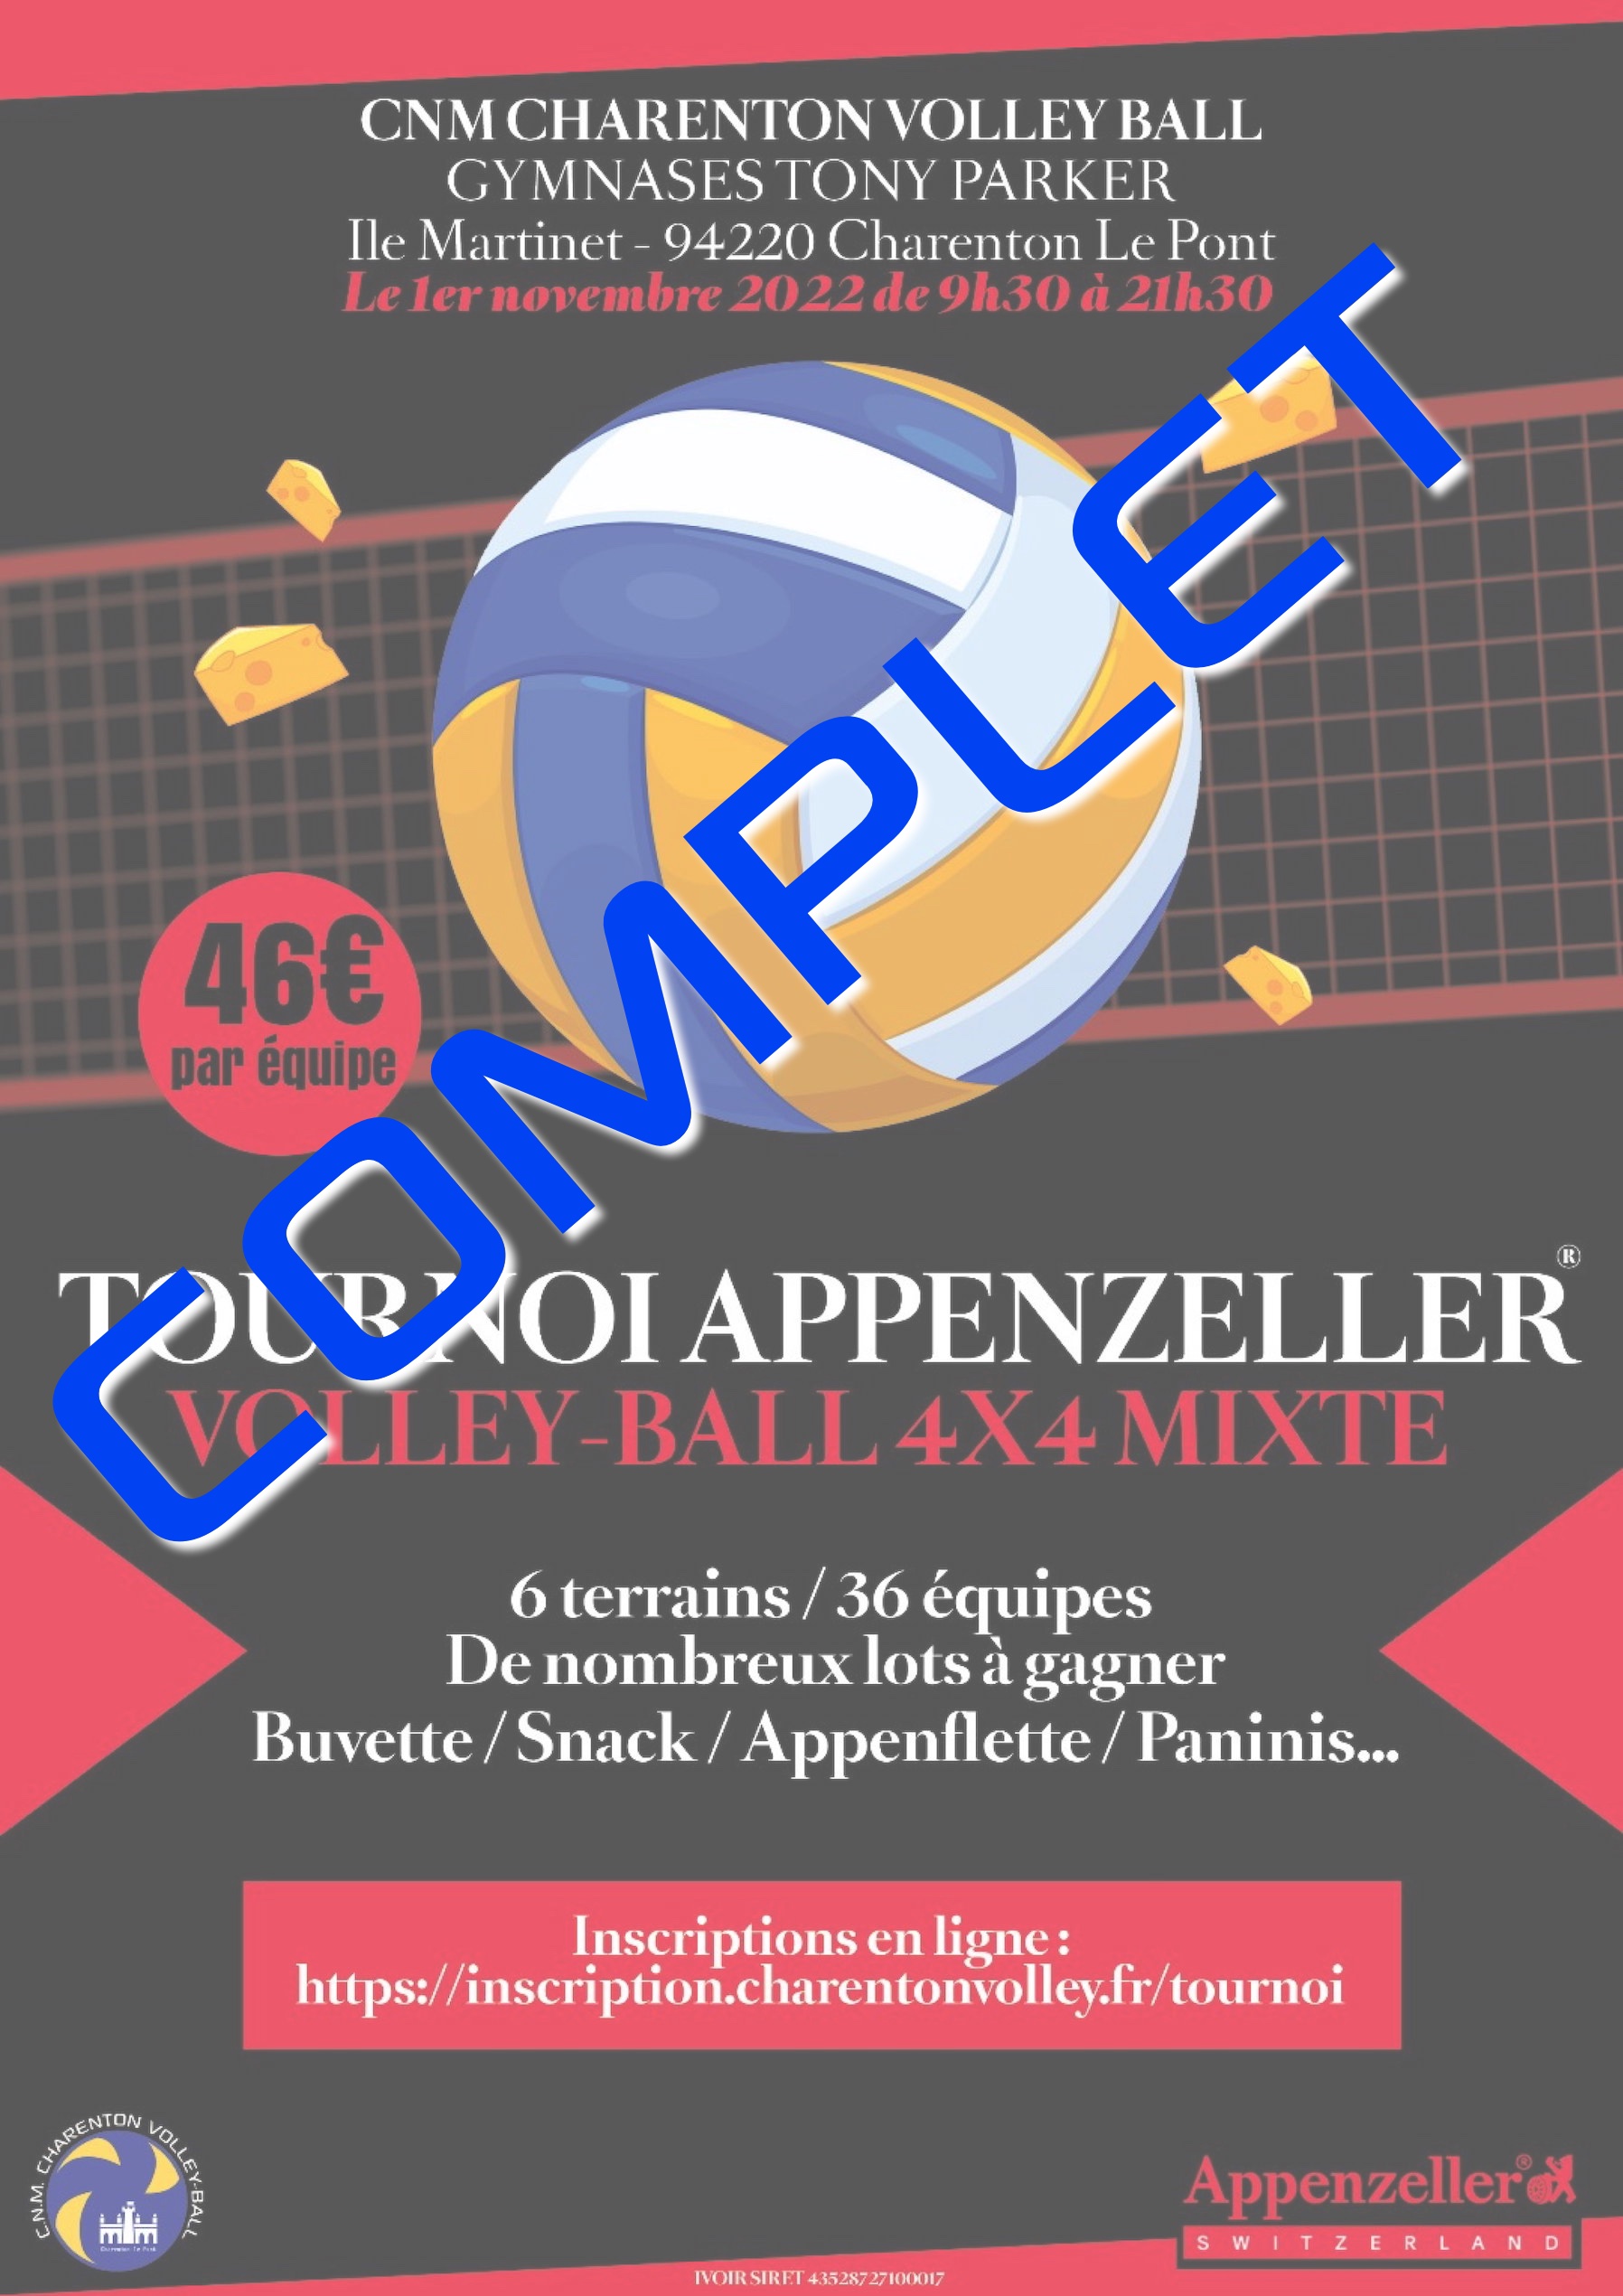 2022-11-01_cnm_affiche_complet